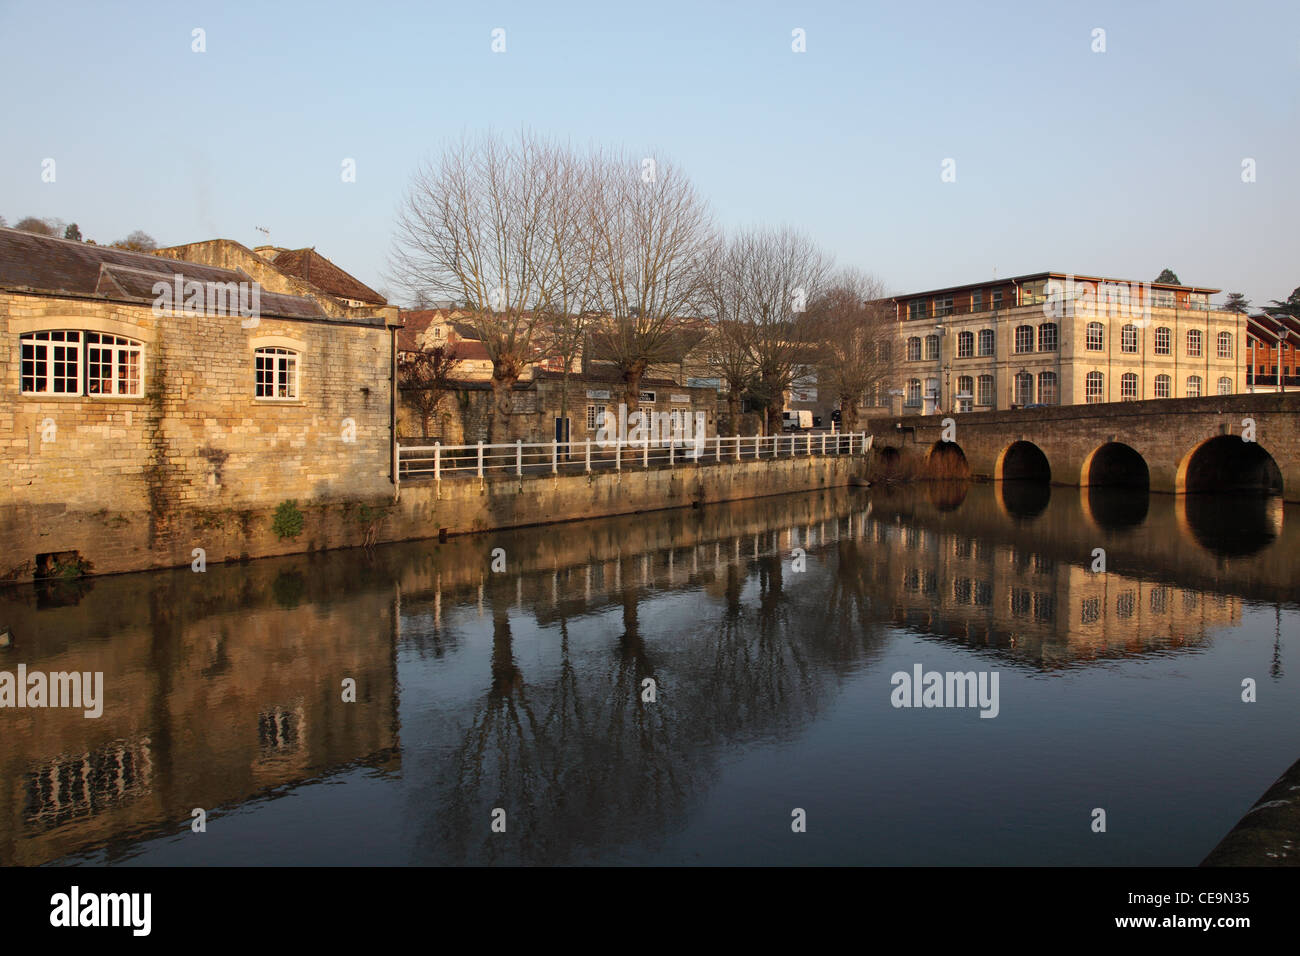 Reflections on the town bridge and buildings in the River Avon, Bradford on Avon, Wiltshire, England, UK Stock Photo